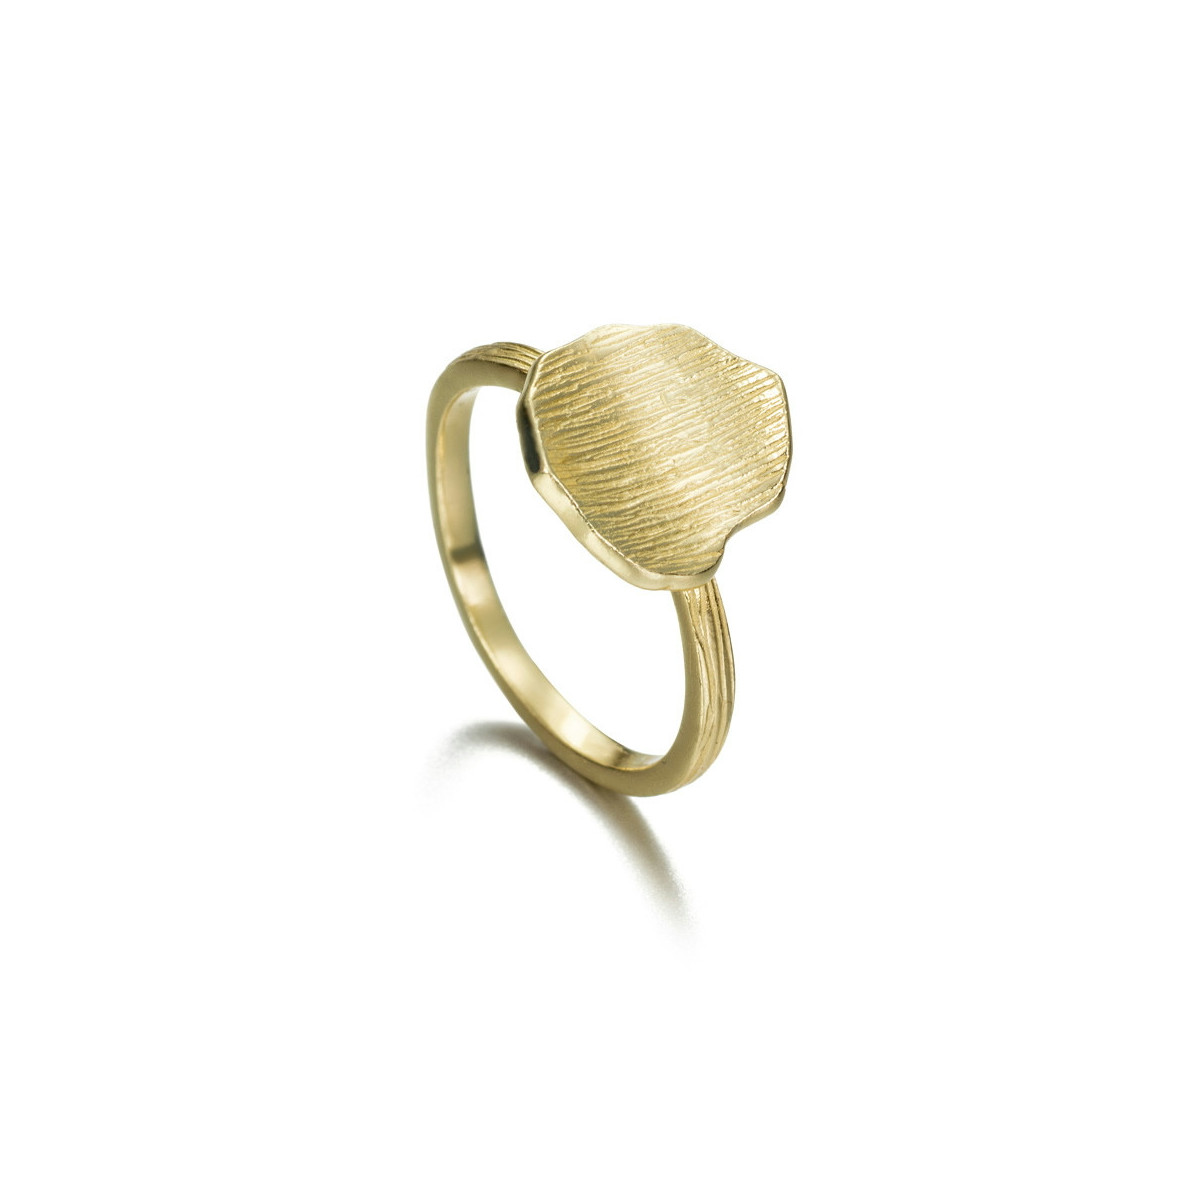 Planet Ring in Silver.  18k Gold Vermeil